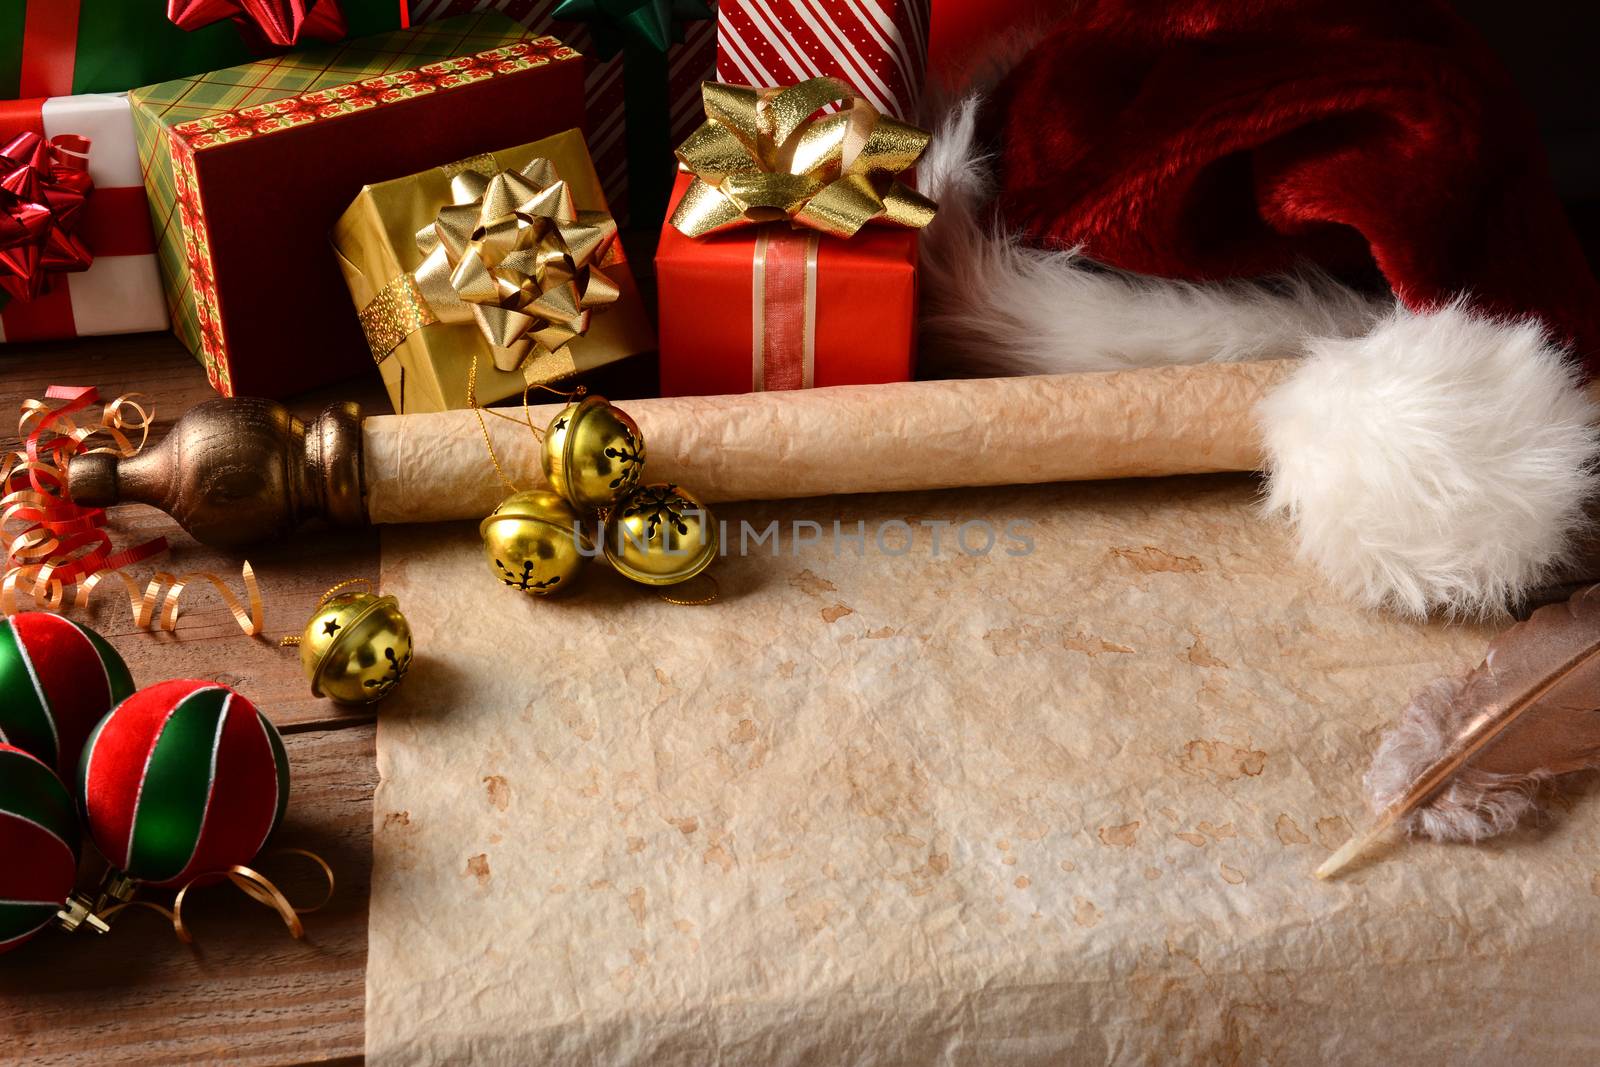 A Christmas Still Life with an old parchment scroll, presents, ornaments and a Santa Hat. Closeup in horizontal format with strong side light.  This could be Santa's North Pole headquarters where he is about to begin writing his Naughty and Nice list.